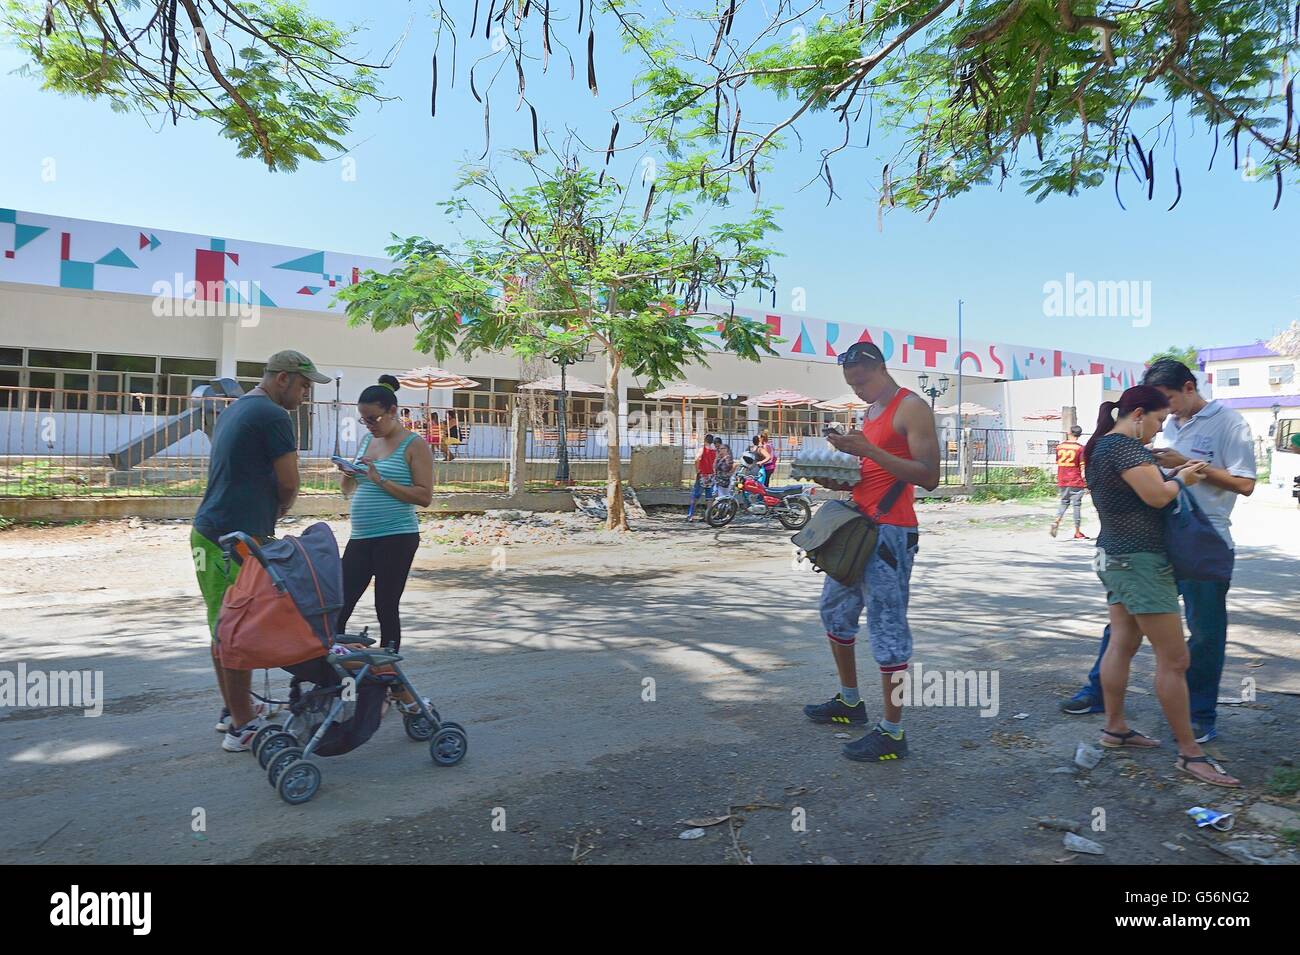 Alamar, Alamar, Cuba. 21st May, 2016. Daily Life as seen in street scenes from Alamar, the largest public housing project in Cuba with 100,000 residents, Alamar, Cuba, May 2016. © Rory Merry/ZUMA Wire/Alamy Live News Stock Photo